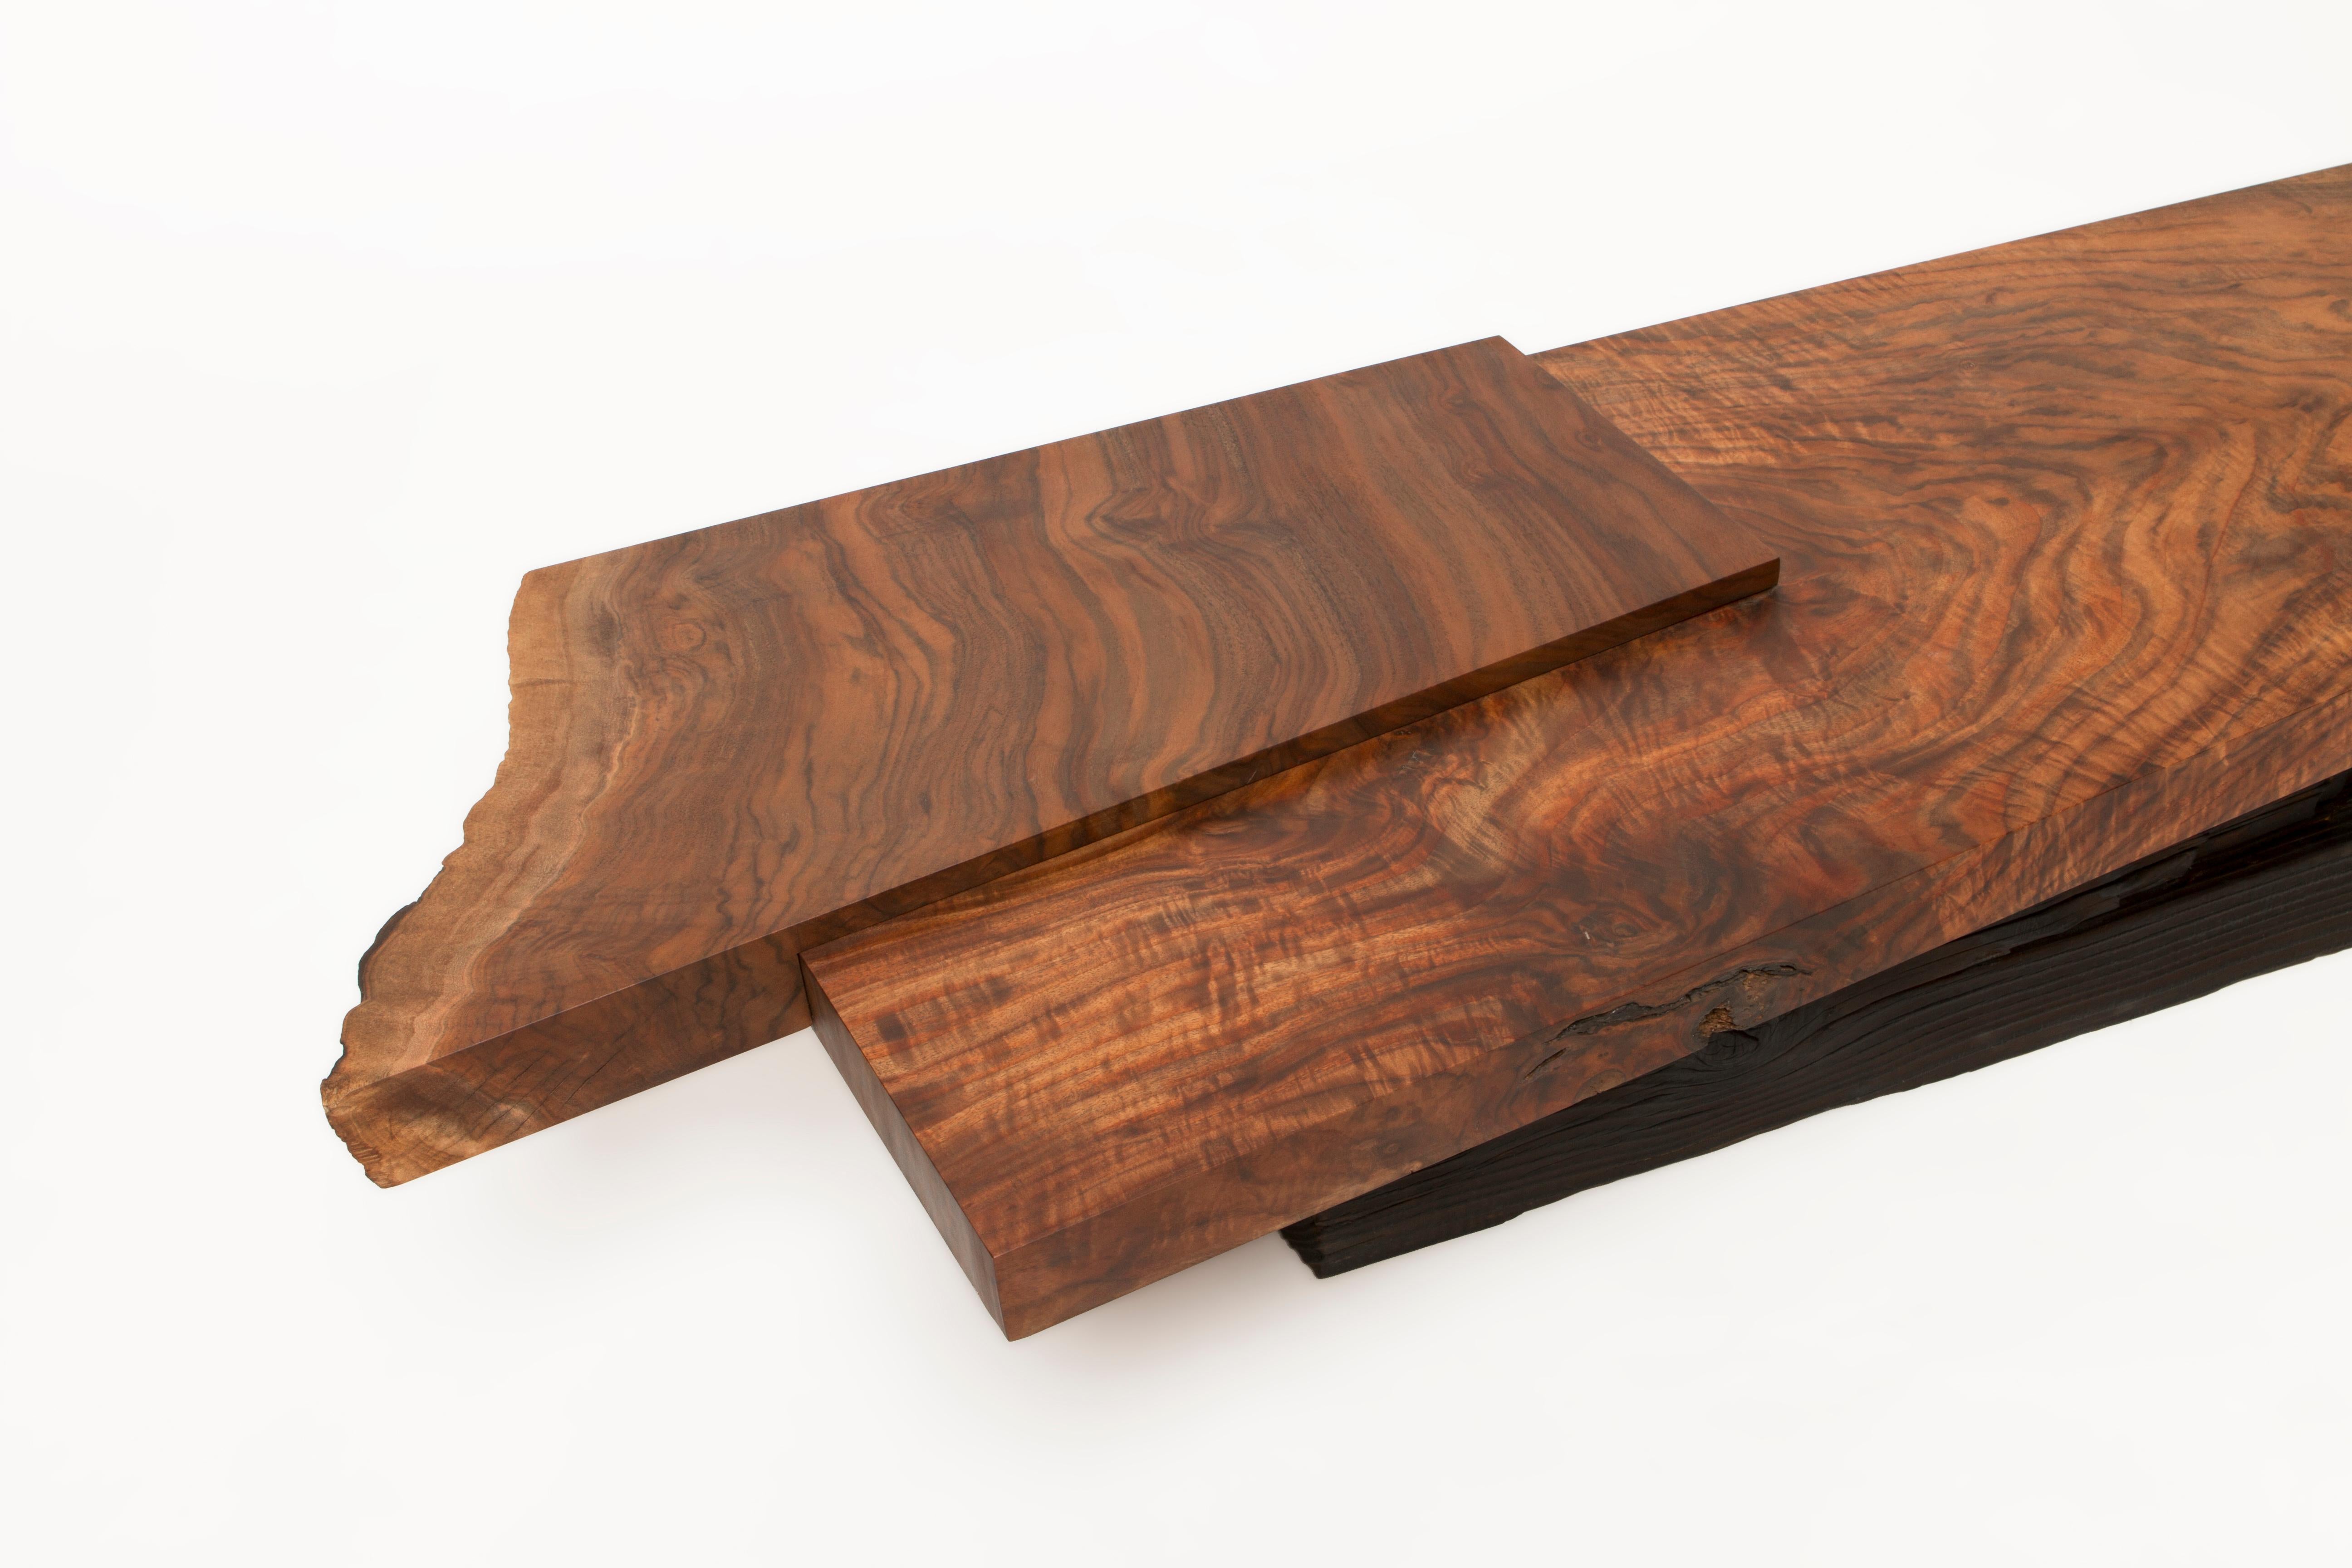 Part of Taylor Donsker's Strike/Slip collection, this abstract modern bench is inspired by California strike slip earthquakes and wood movement. The strike/slip bench features a multi-layered, 